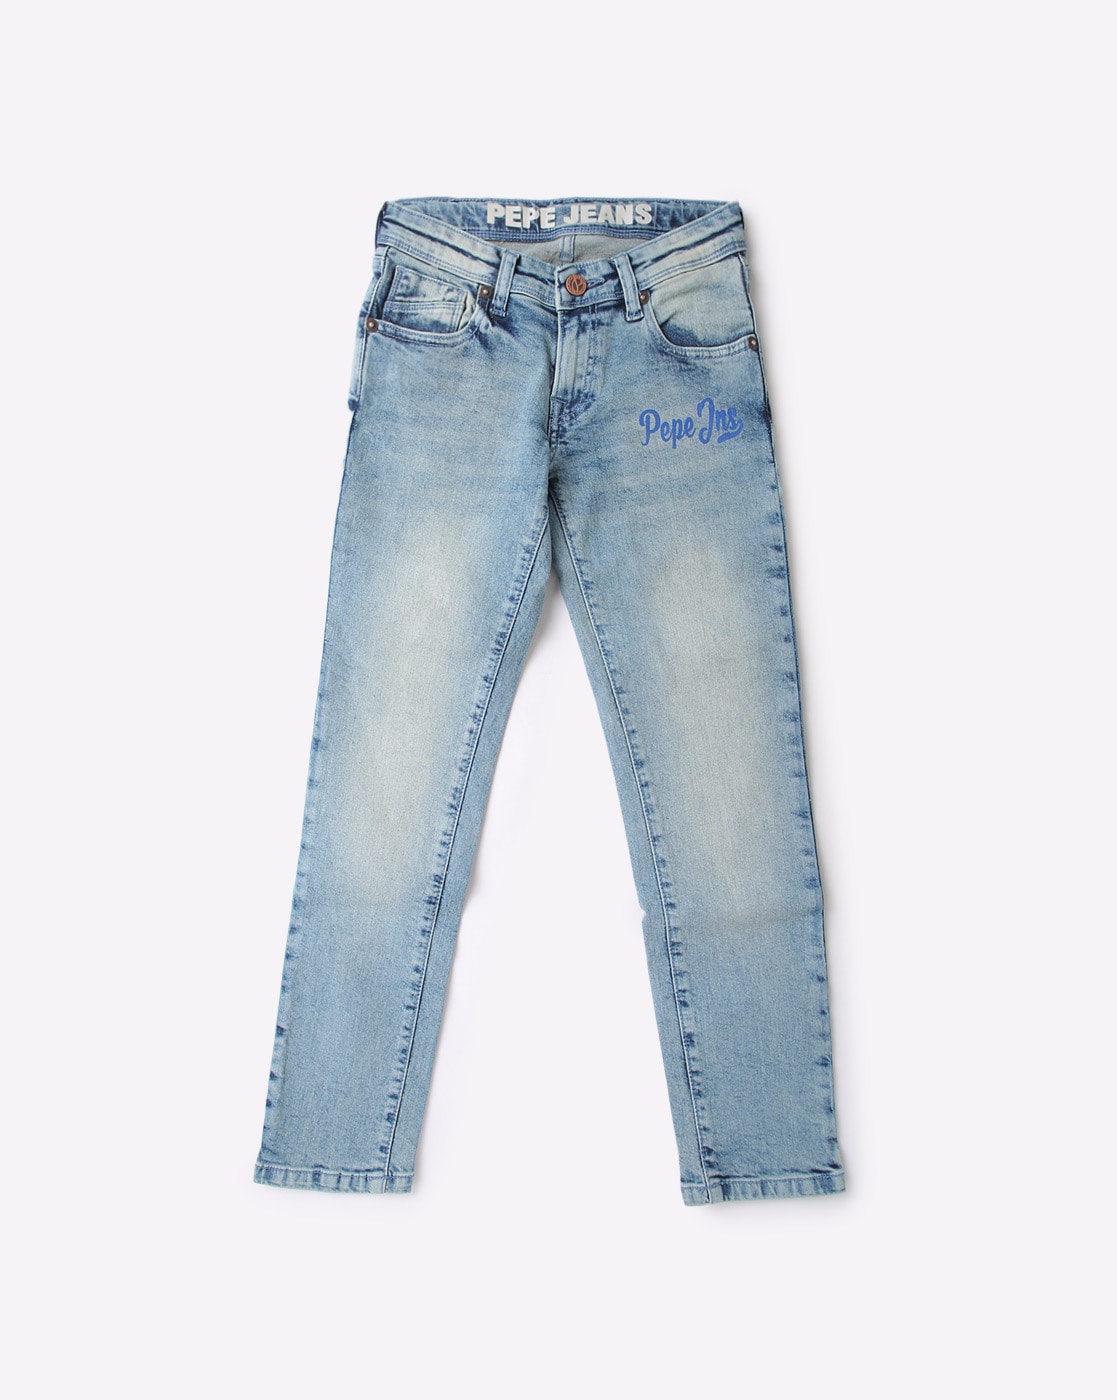 Pepe Jeans Denim Shorts Boot, broken jeans, blue, electric Blue, pepe png |  PNGWing